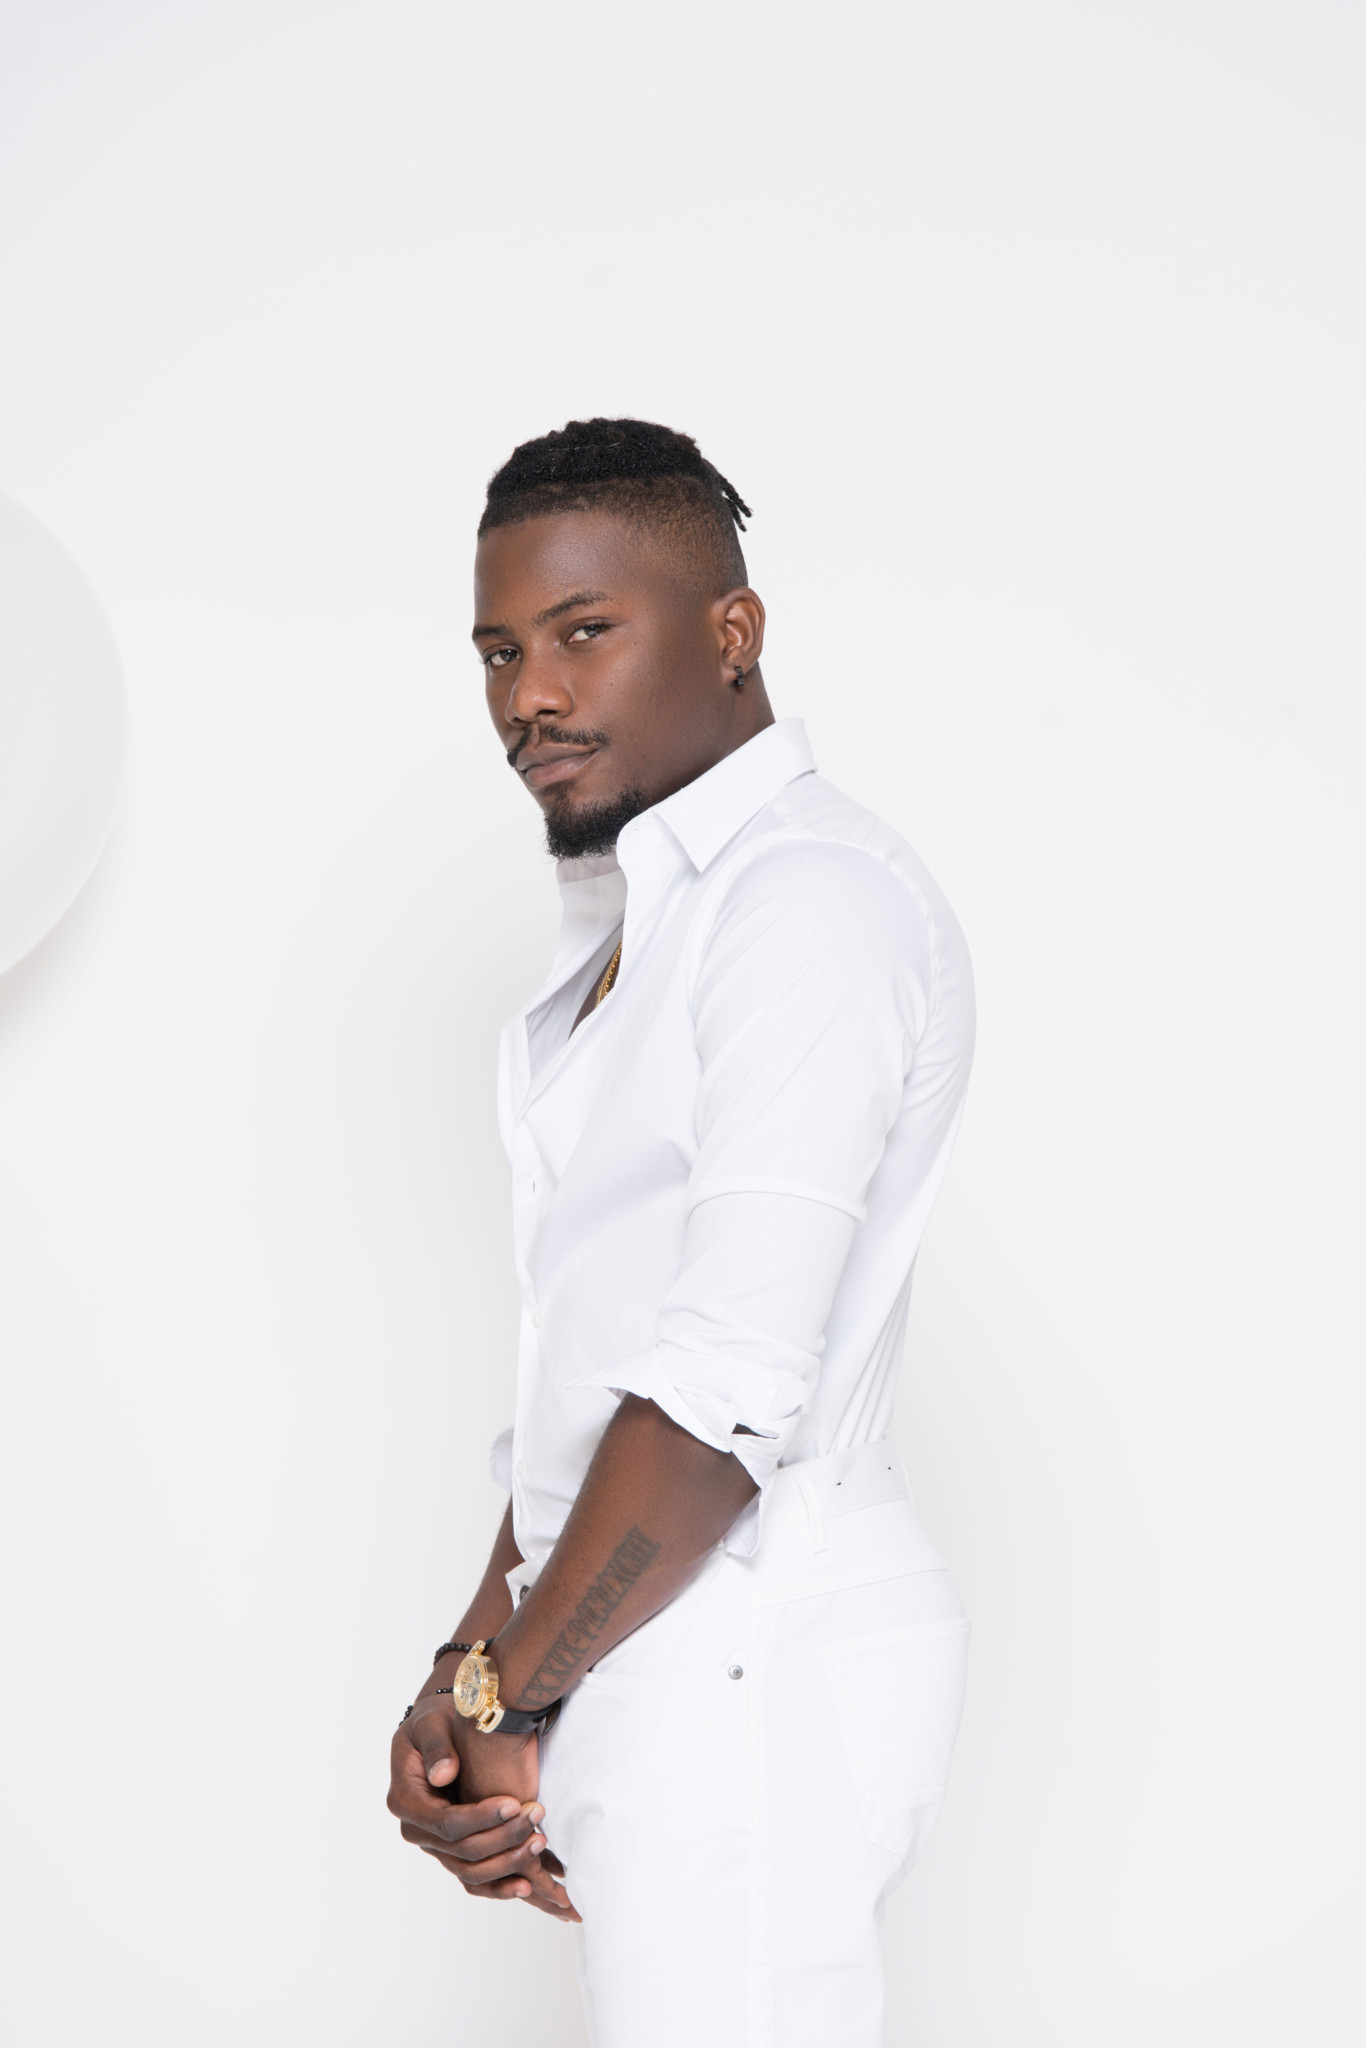 'I Told Them To Make Me Look As Hot As I Am': Check Out Rapper Ycee's New Photos